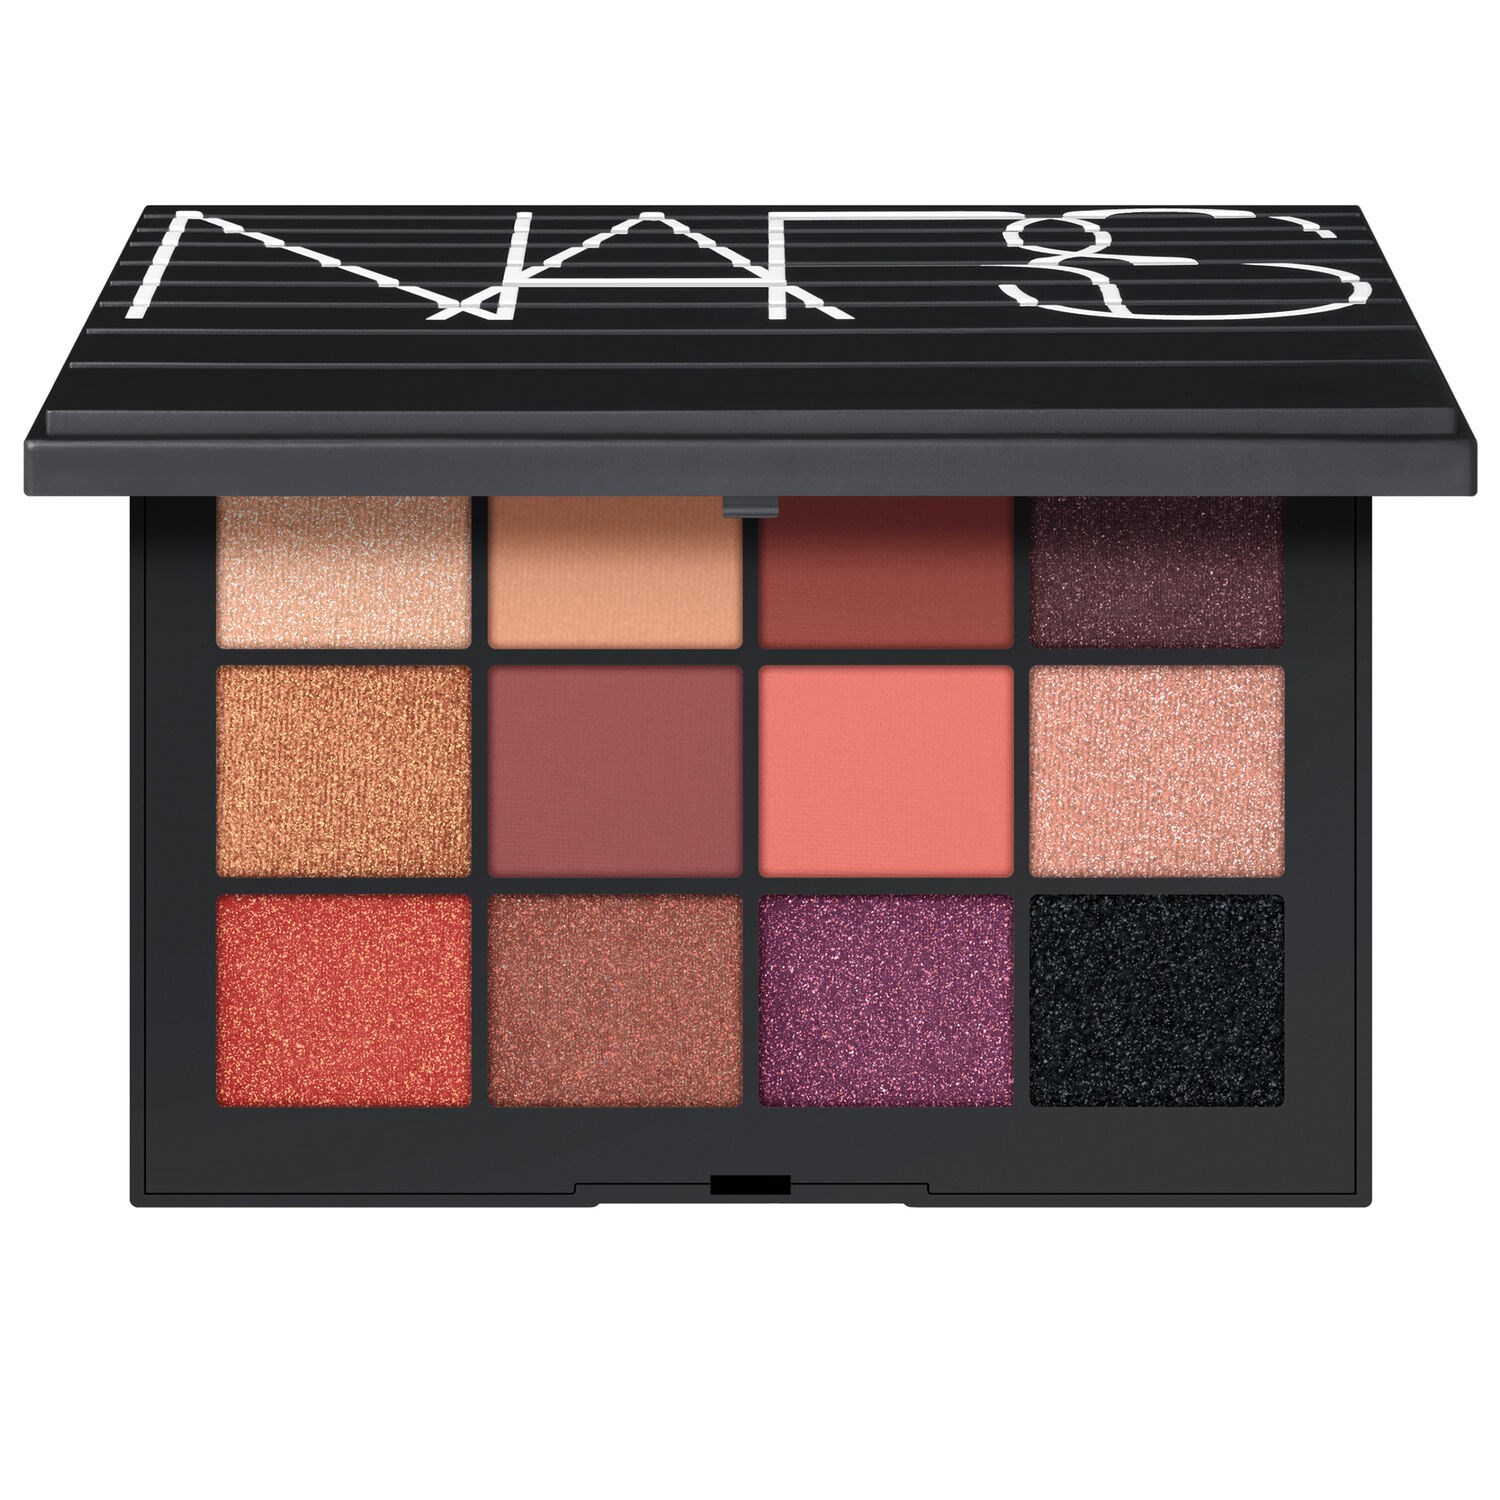 EXTREME EFFECTS EYE SHADOW PALETTE 1